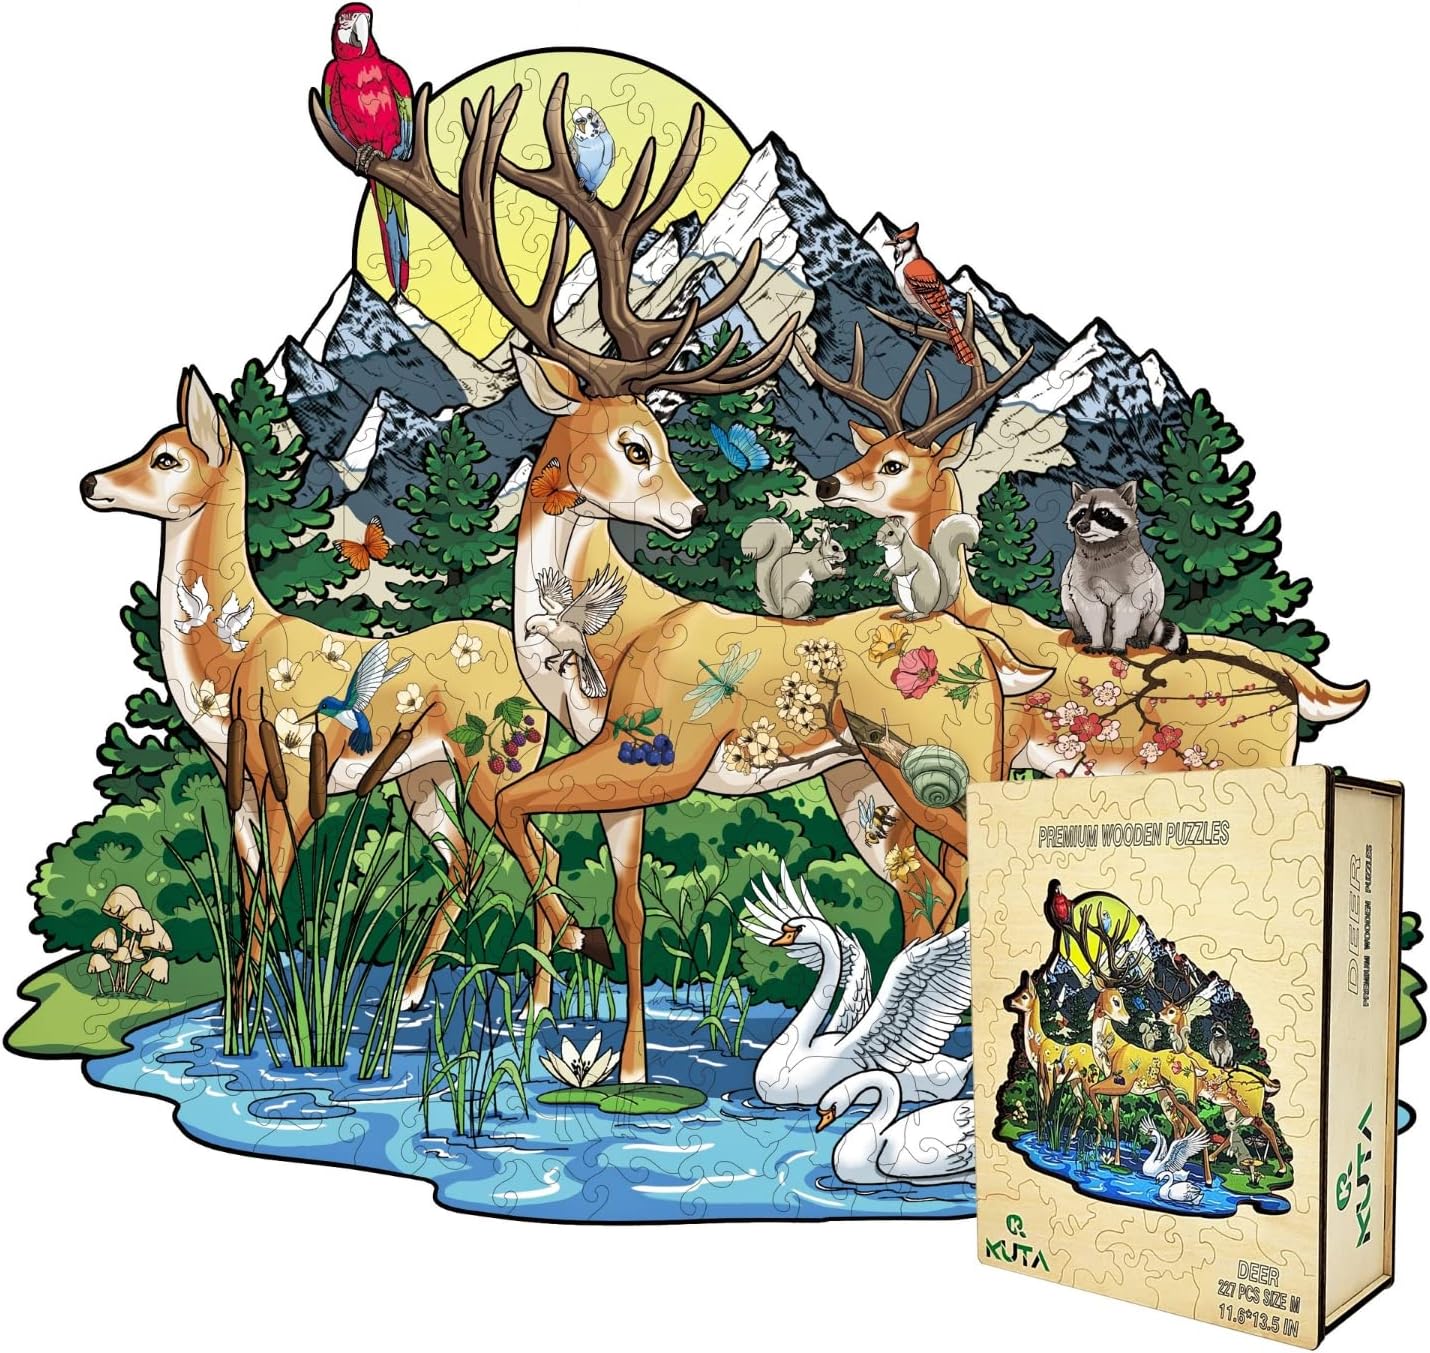 KUTA Wooden Jigsaw Puzzles, Unique Animal Shape, Set with Wall Mounting Kits for Decoration, Best Gift for Children and Adults (Deer)